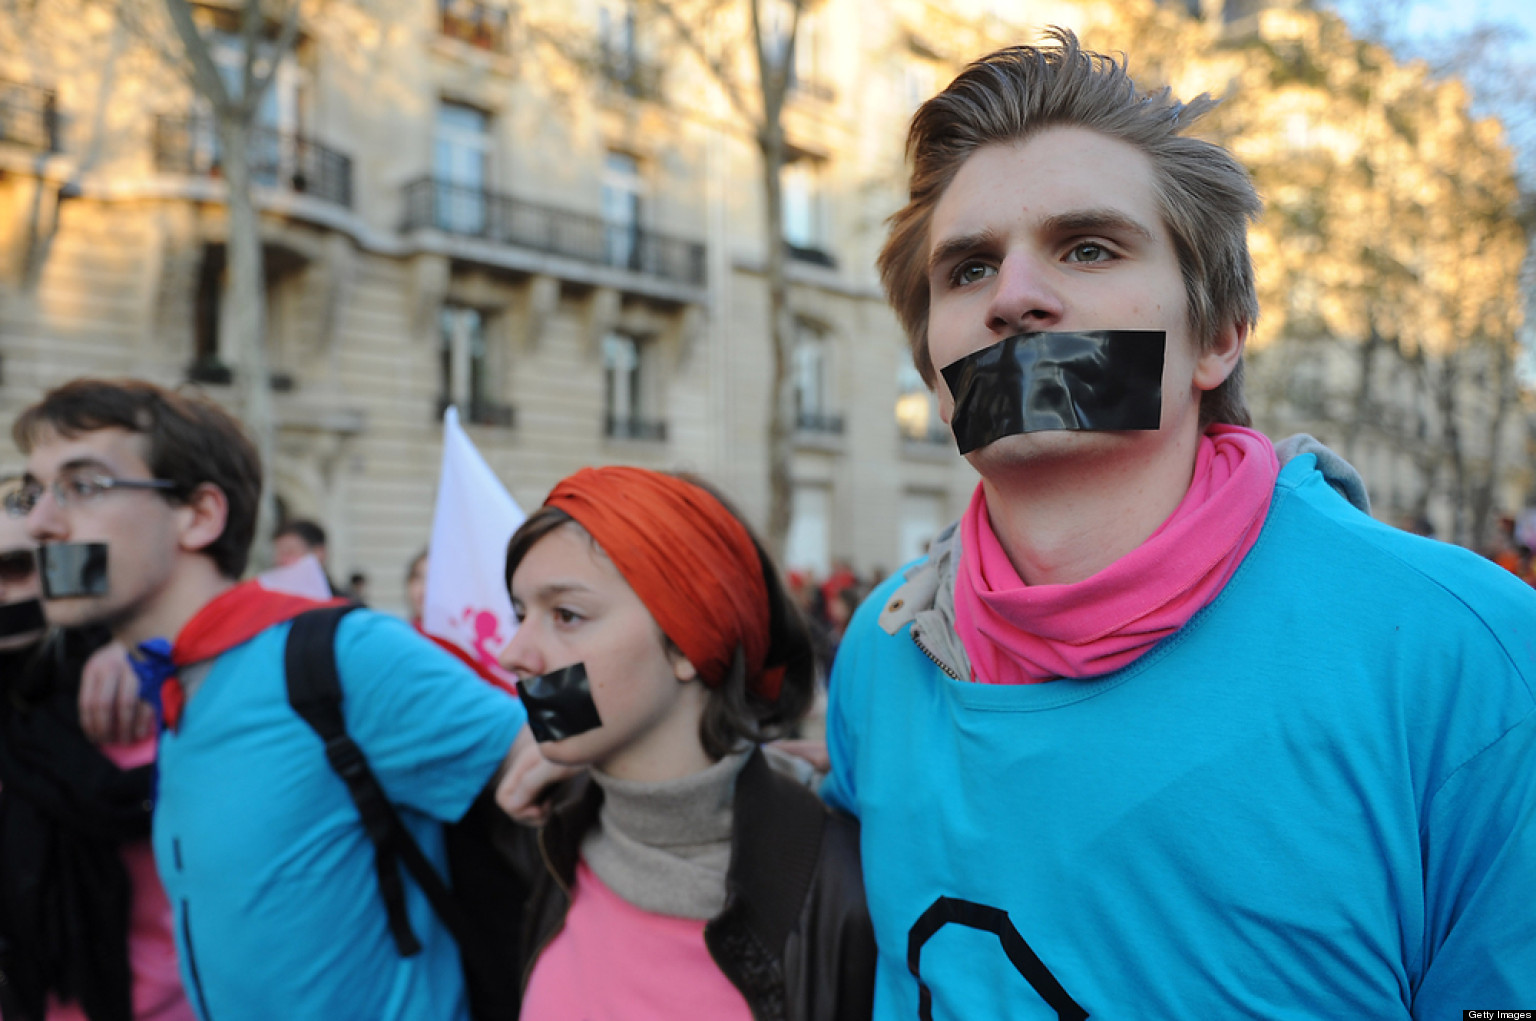 Mortauxgay Death To Gays Hashtag Trends On Twitter After France Legalizes Gay Marriage